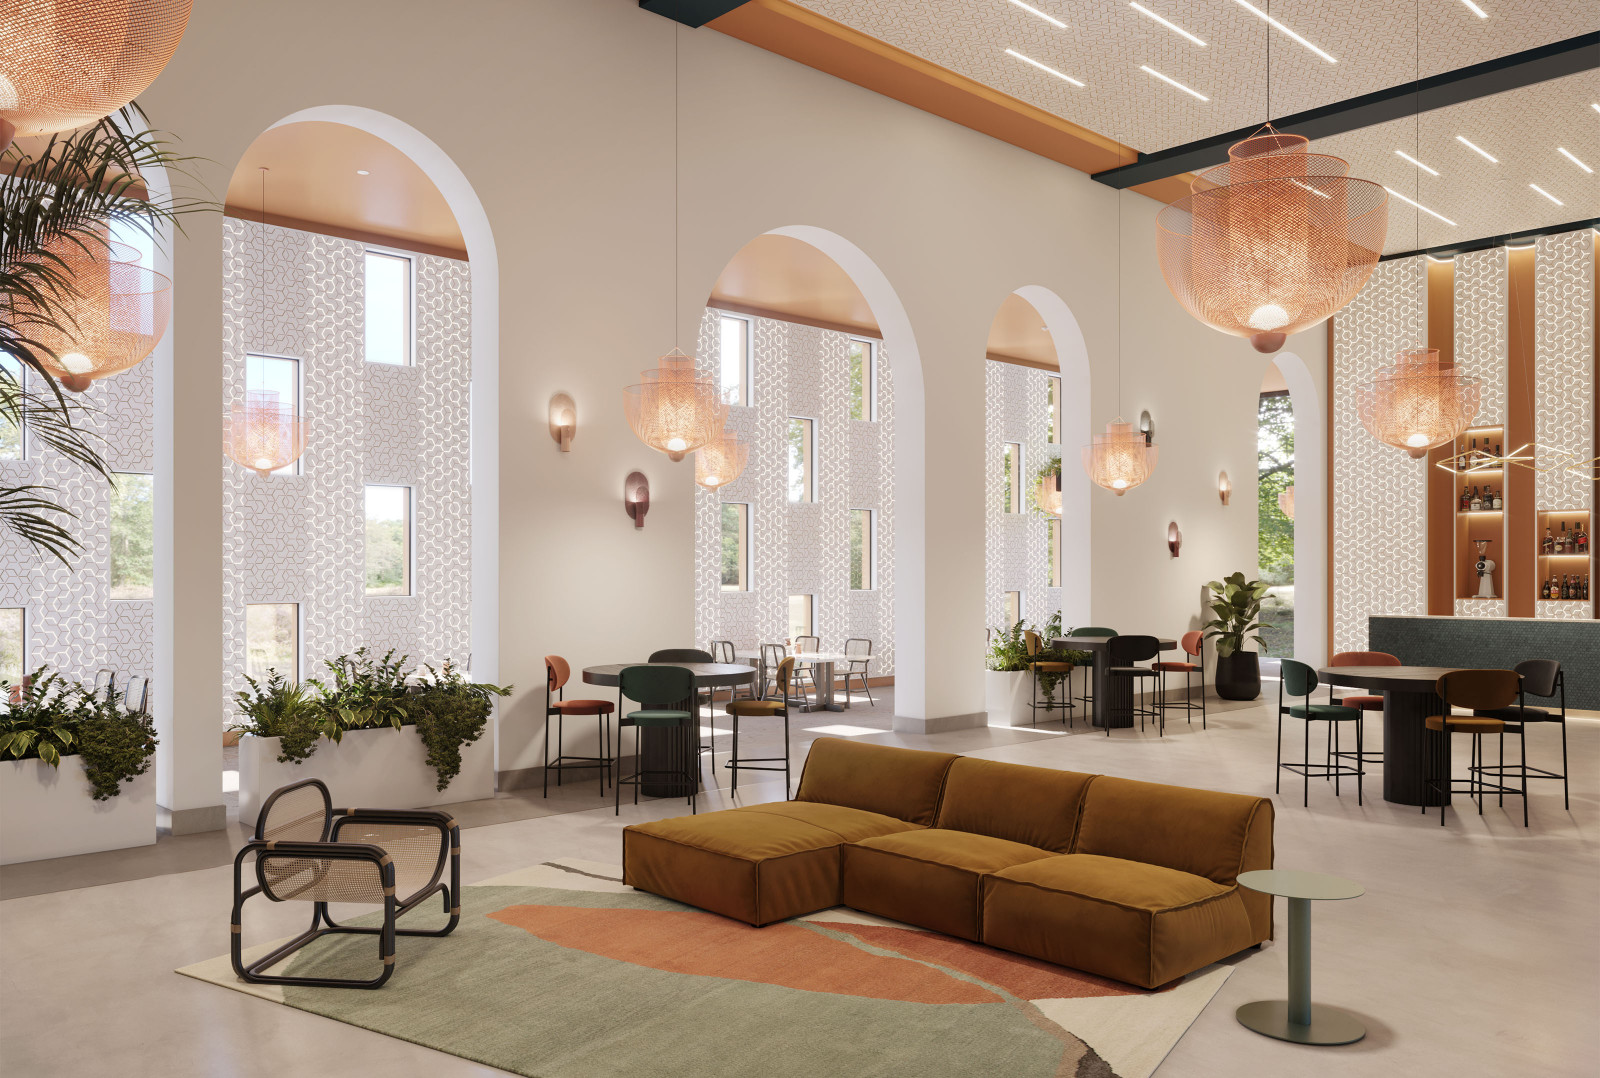 This lobby area has white walls, potted plants, a green sofa, a black chair and a multi-colored rug. There are Arktura VaporHue™ Link panels on the far wall with the windows, behind the bar, and on the ceiling integrating Arktura’s Inline Lighting.